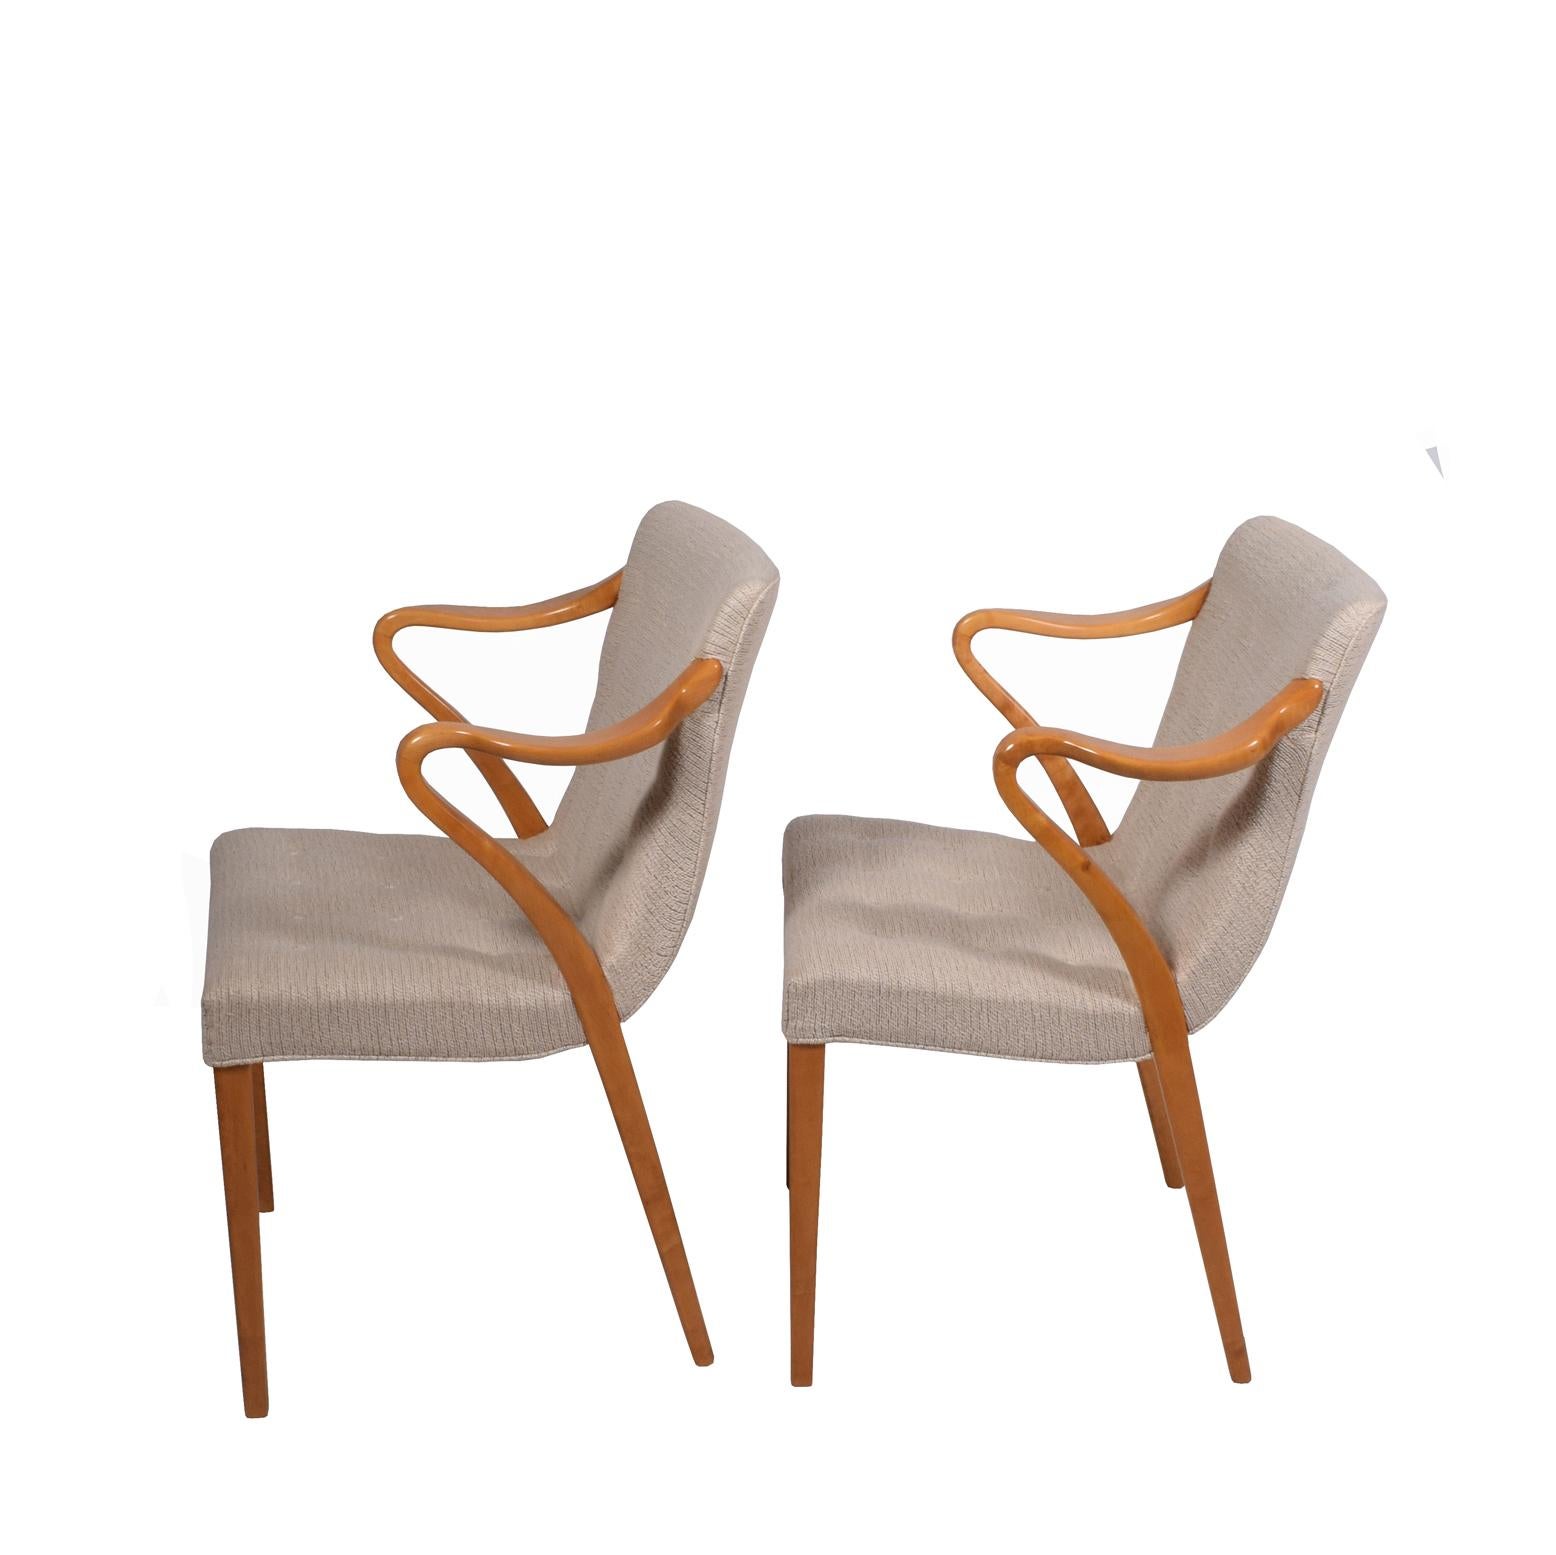 In 1936 Axel Larsson design a group of furniture which was his most known, the armchairs made from solid birchwood and upholstery
Measures: Arm height 28